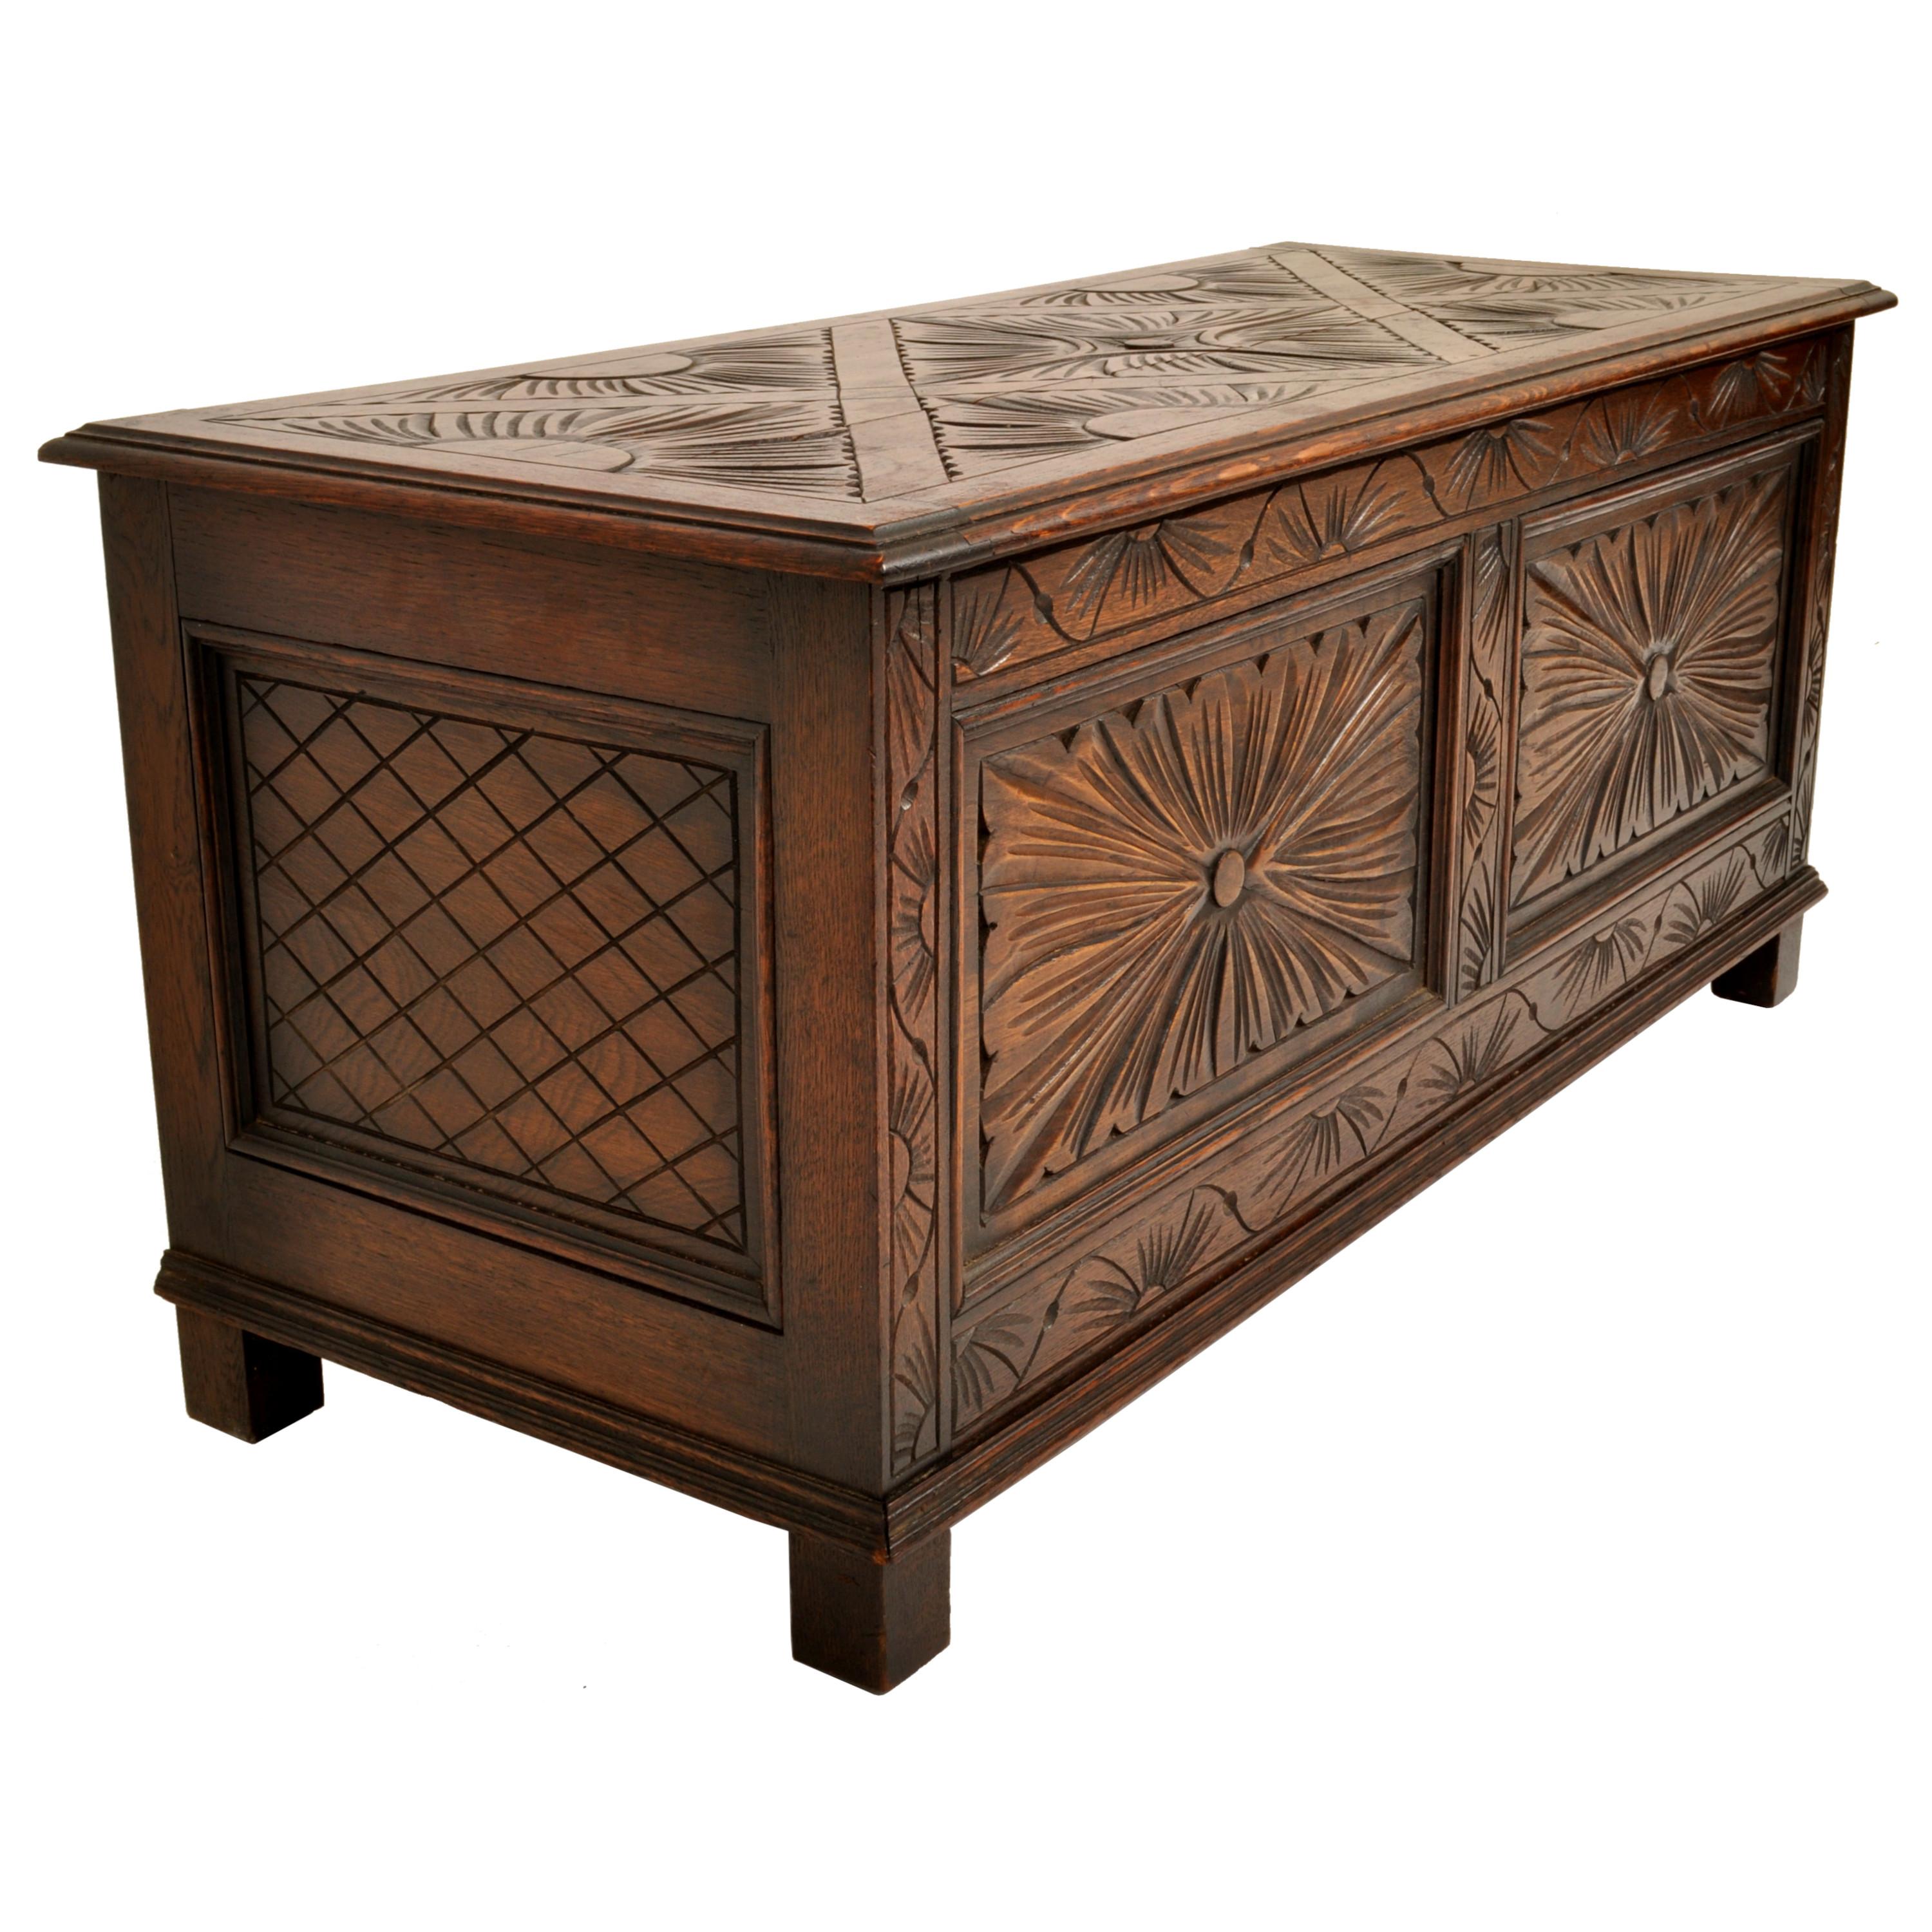 A good English carved oak Arts & Crafts blanket chest, window seat, circa 1900.
The stained oak chest having a hinged lift up lid, the lid is carved with a stylized geometric foliate design, the front of the chest having corresponding carved